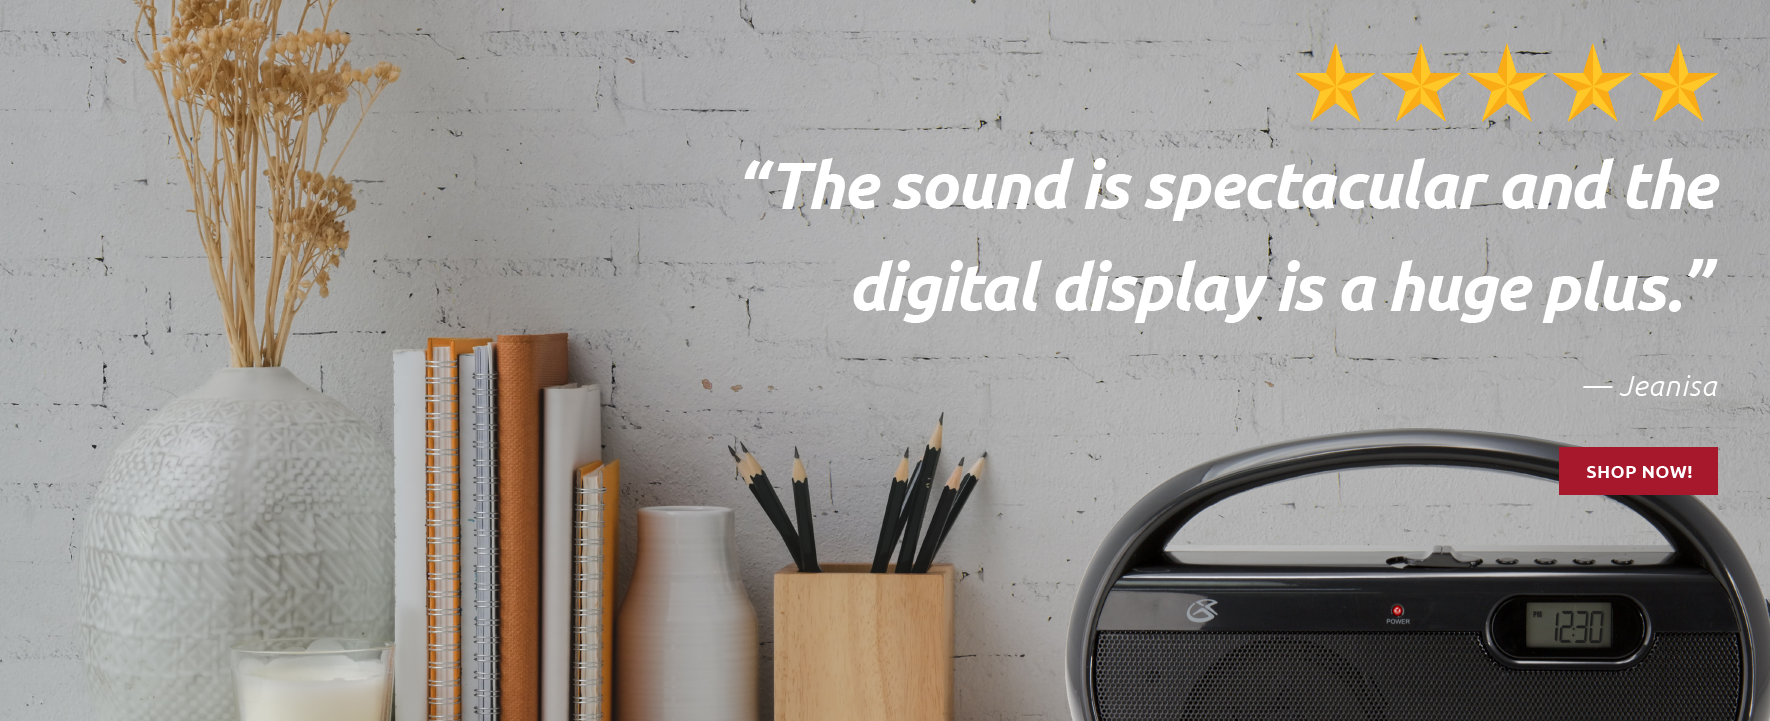 5 Star review for R602 says: The sound is spectacular and the digital display is a huge plus